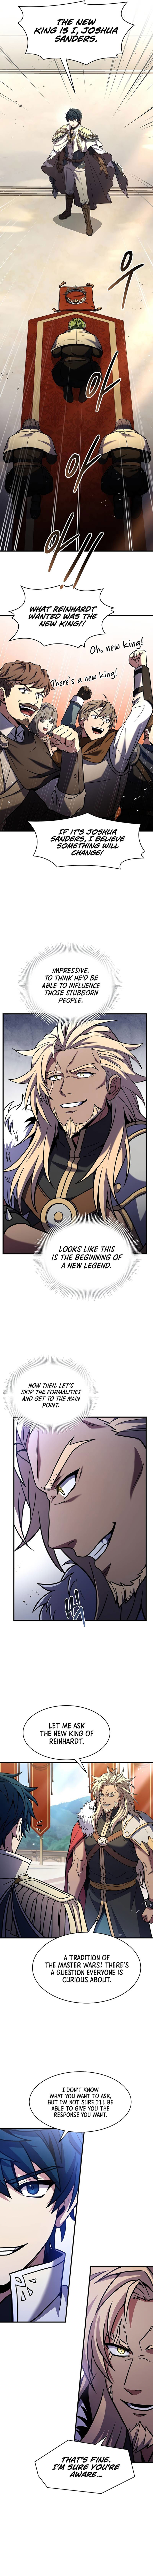 Return of the Legendary Spear Knight Chapter 78 page 9